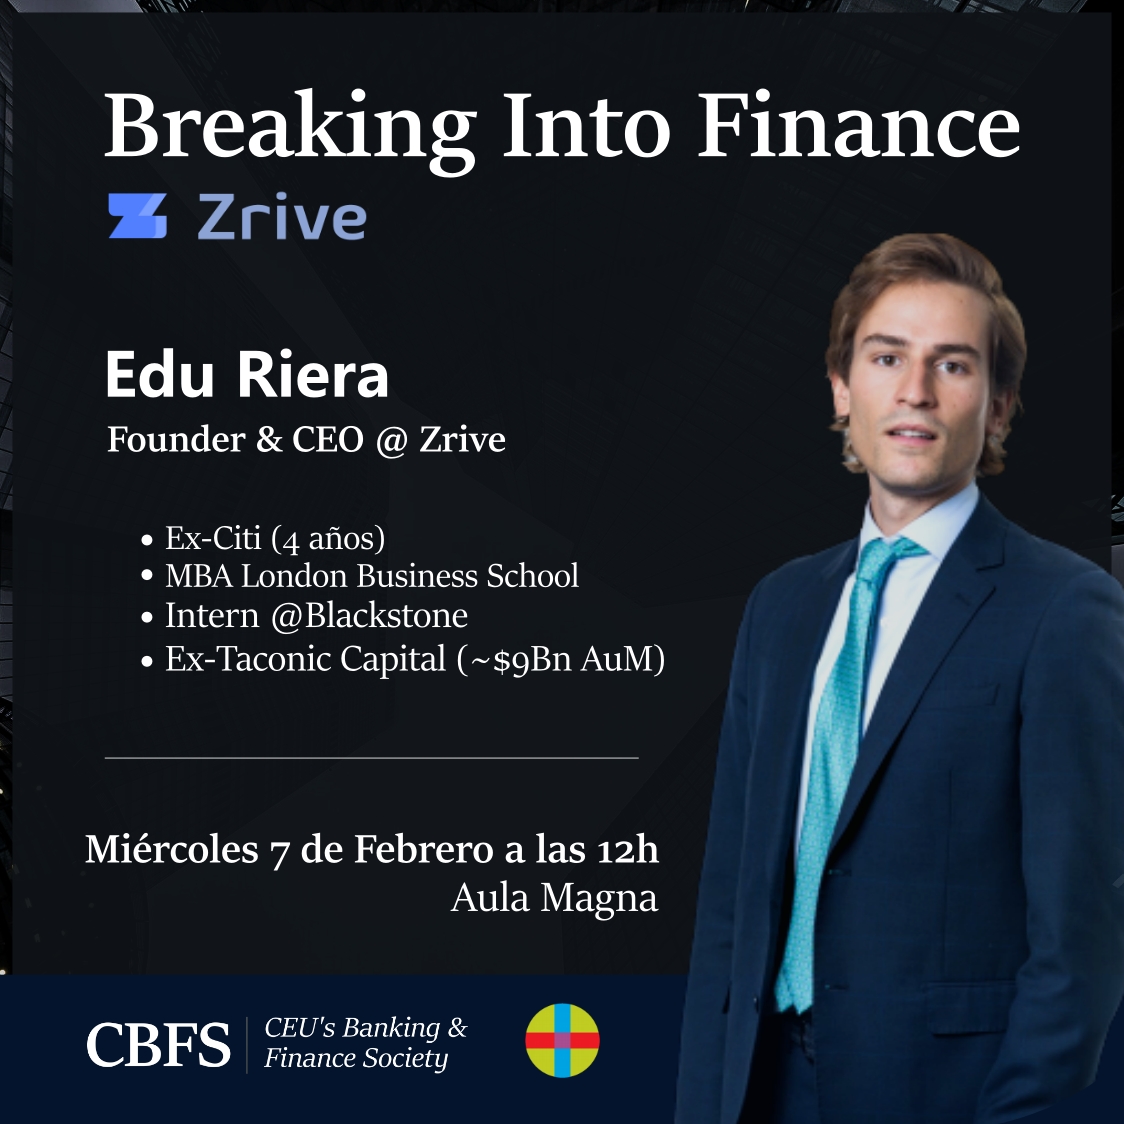 Photo of Flagship Event of CEU's Banking & Finance Society called Breaking Into Finance - Edu Riera @Zrive